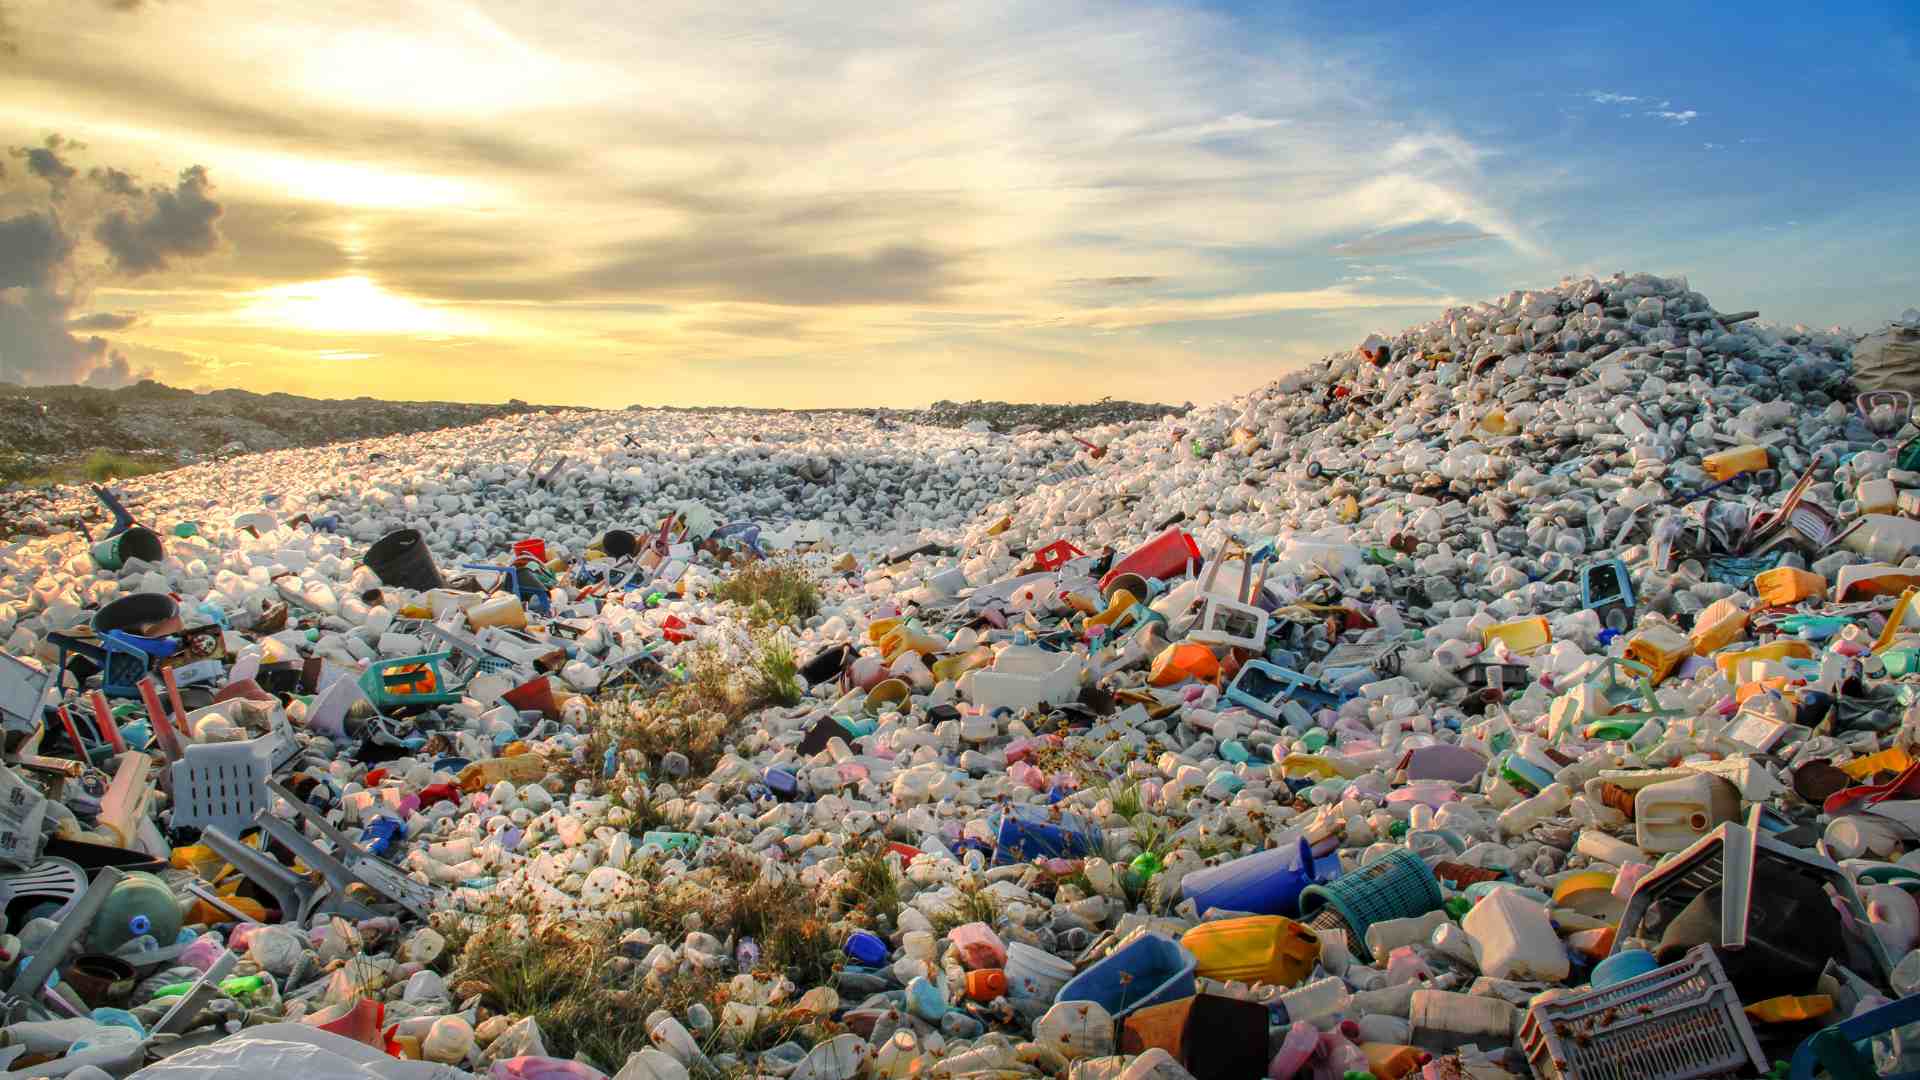 You are currently viewing Economic advantages and disadvantages of extended producer responsibility (EPR) program for plastic waste in India